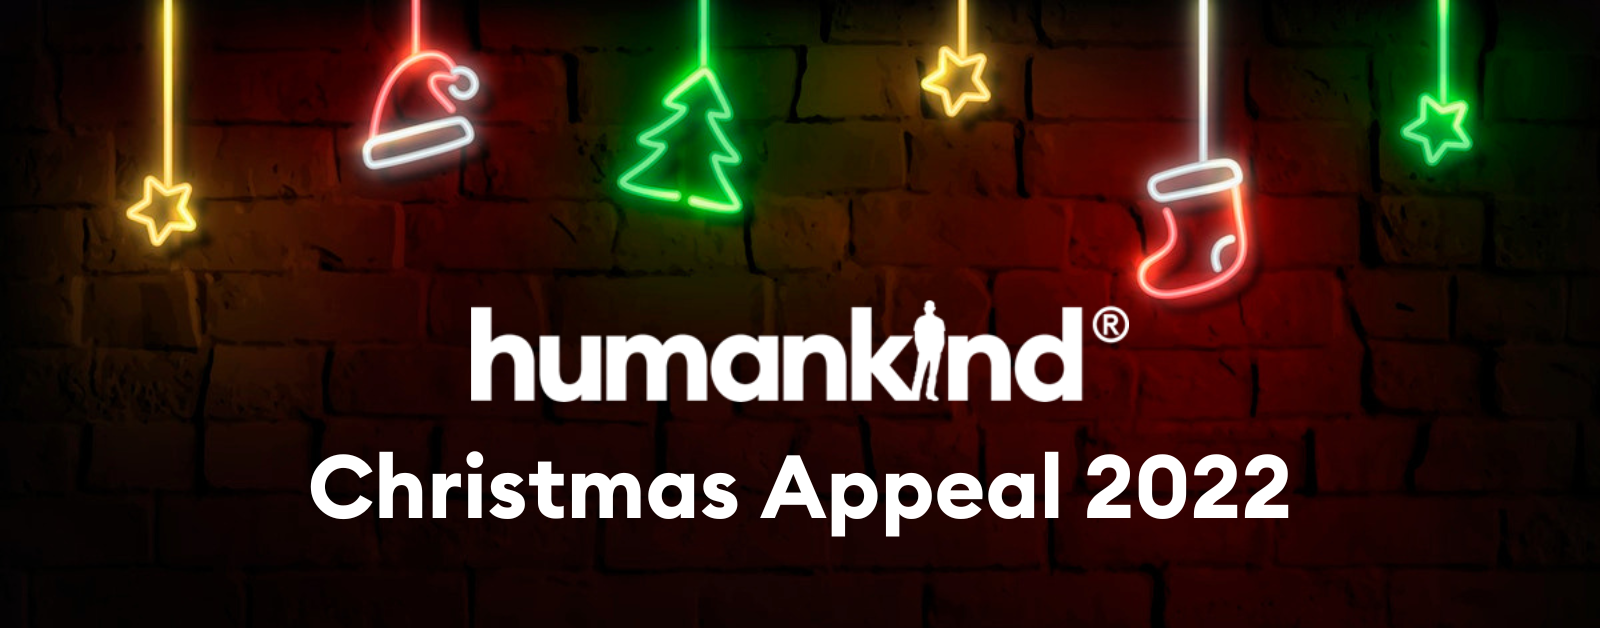 https://humankindcharity.org.uk/wp-content/uploads/2022/11/Christmas-Appeal-2022-still-1600-x-628-px.png